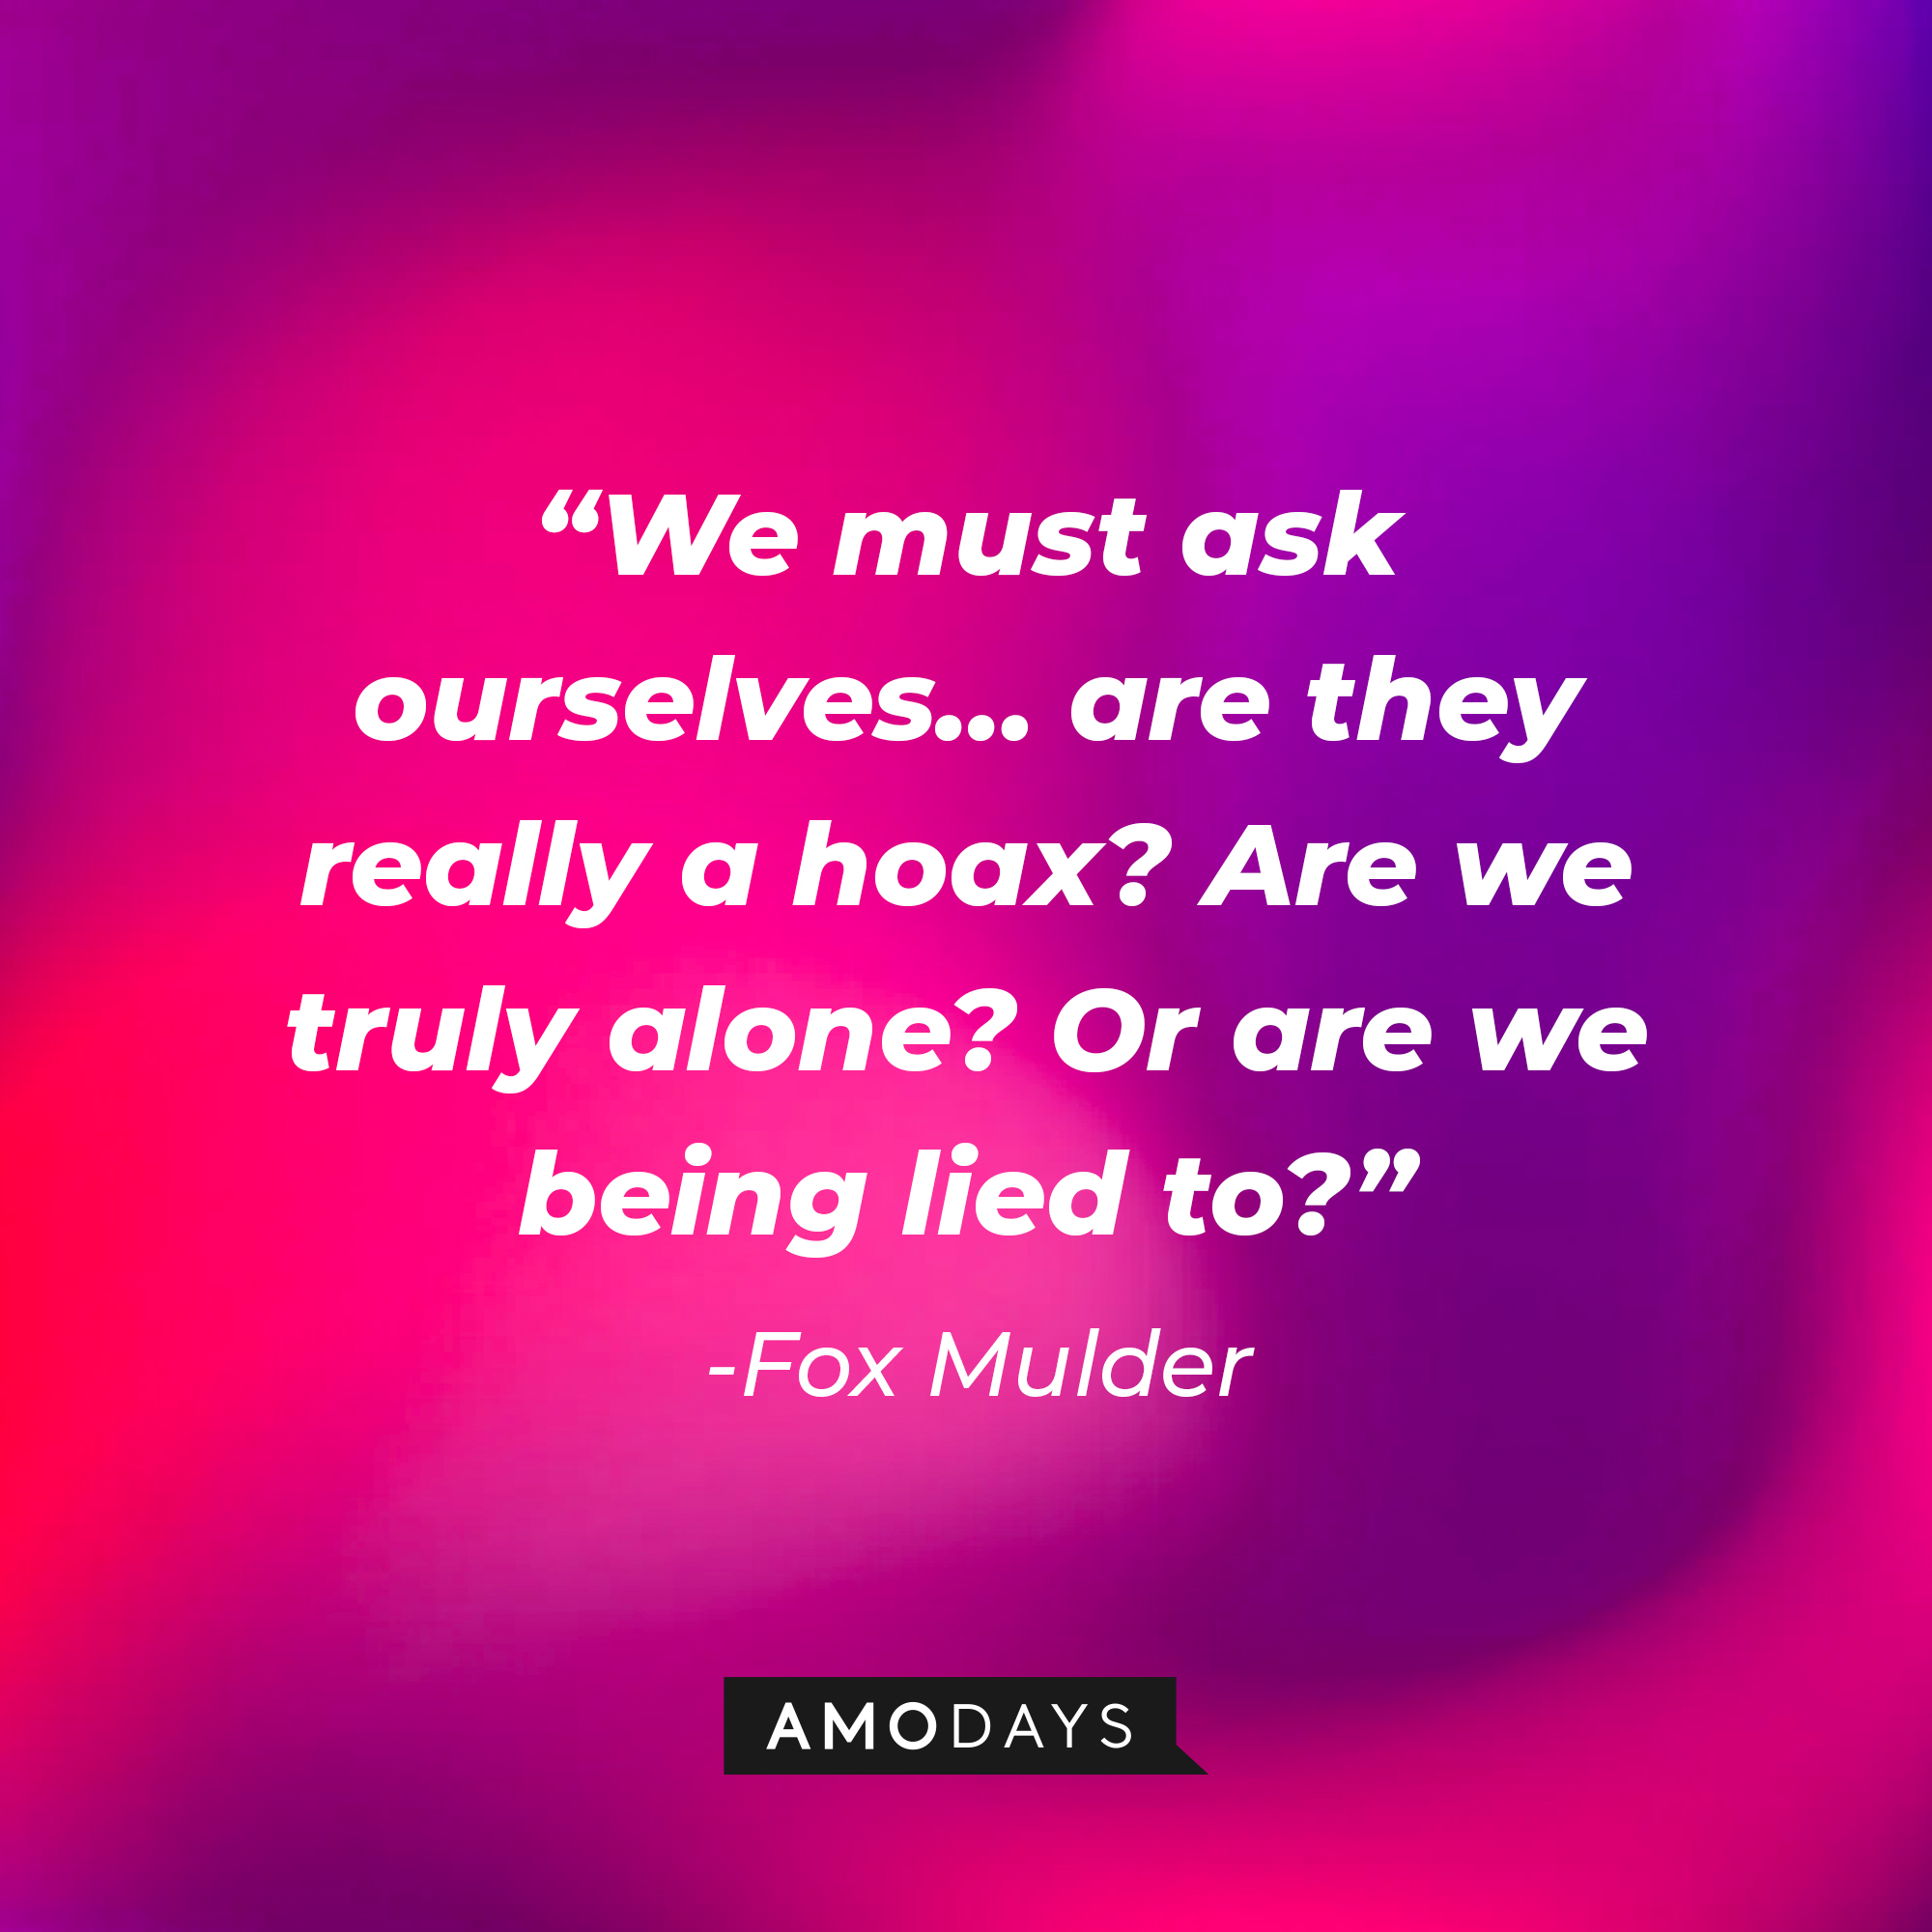 Fox Mulder's quote: "We must ask ourselves… are they really a hoax? Are we truly alone? Or are we being lied to?" | Source: AmoDays